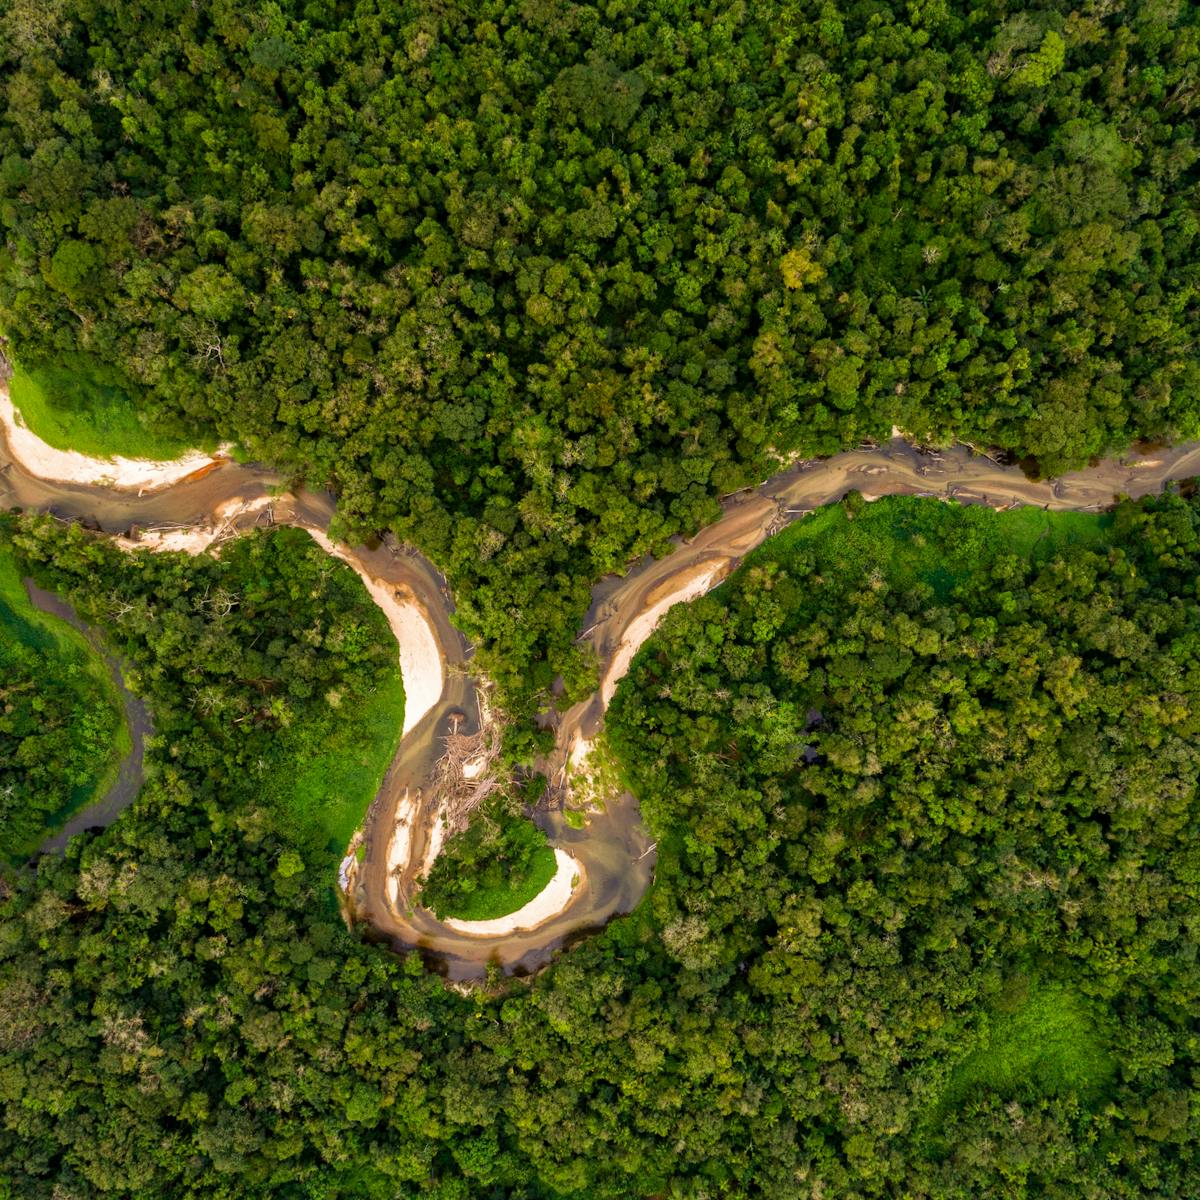 Climate Explained What Would Happen If We Cut Down The Amazon Rainforest